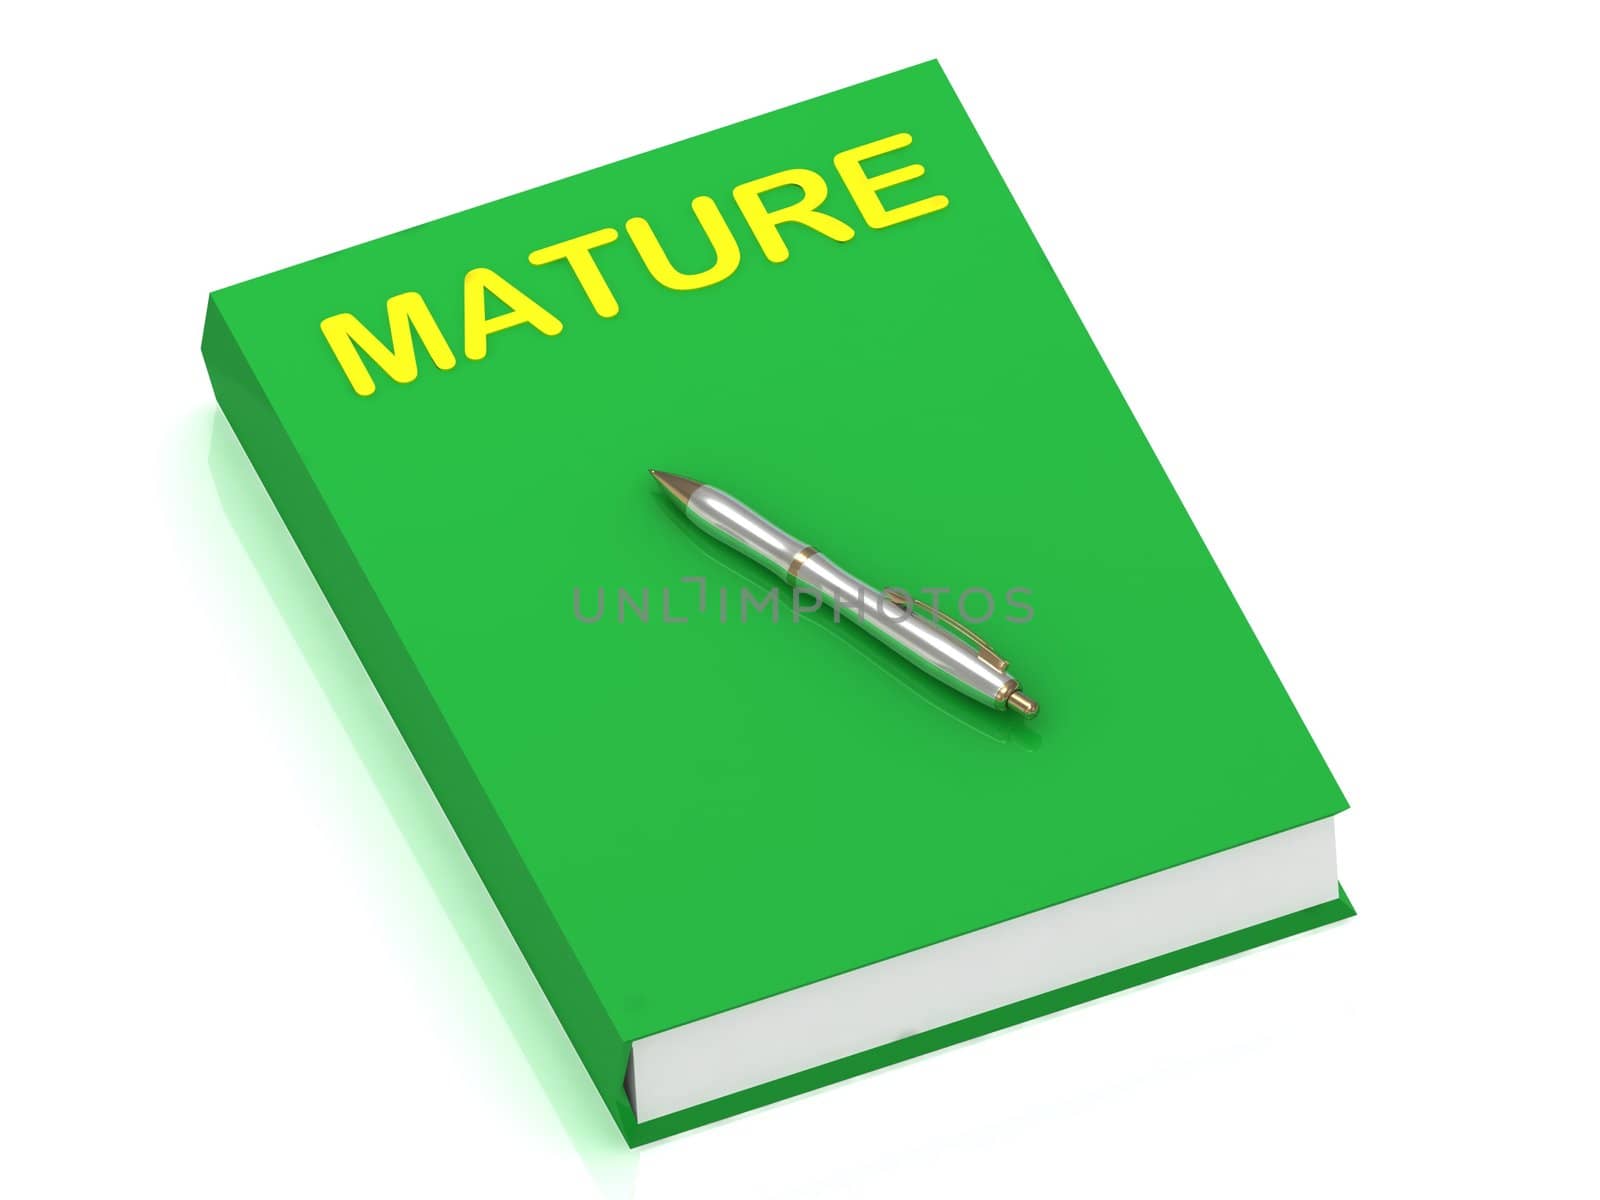 MATURE name on cover book and silver pen on the book. 3D illustration isolated on white background